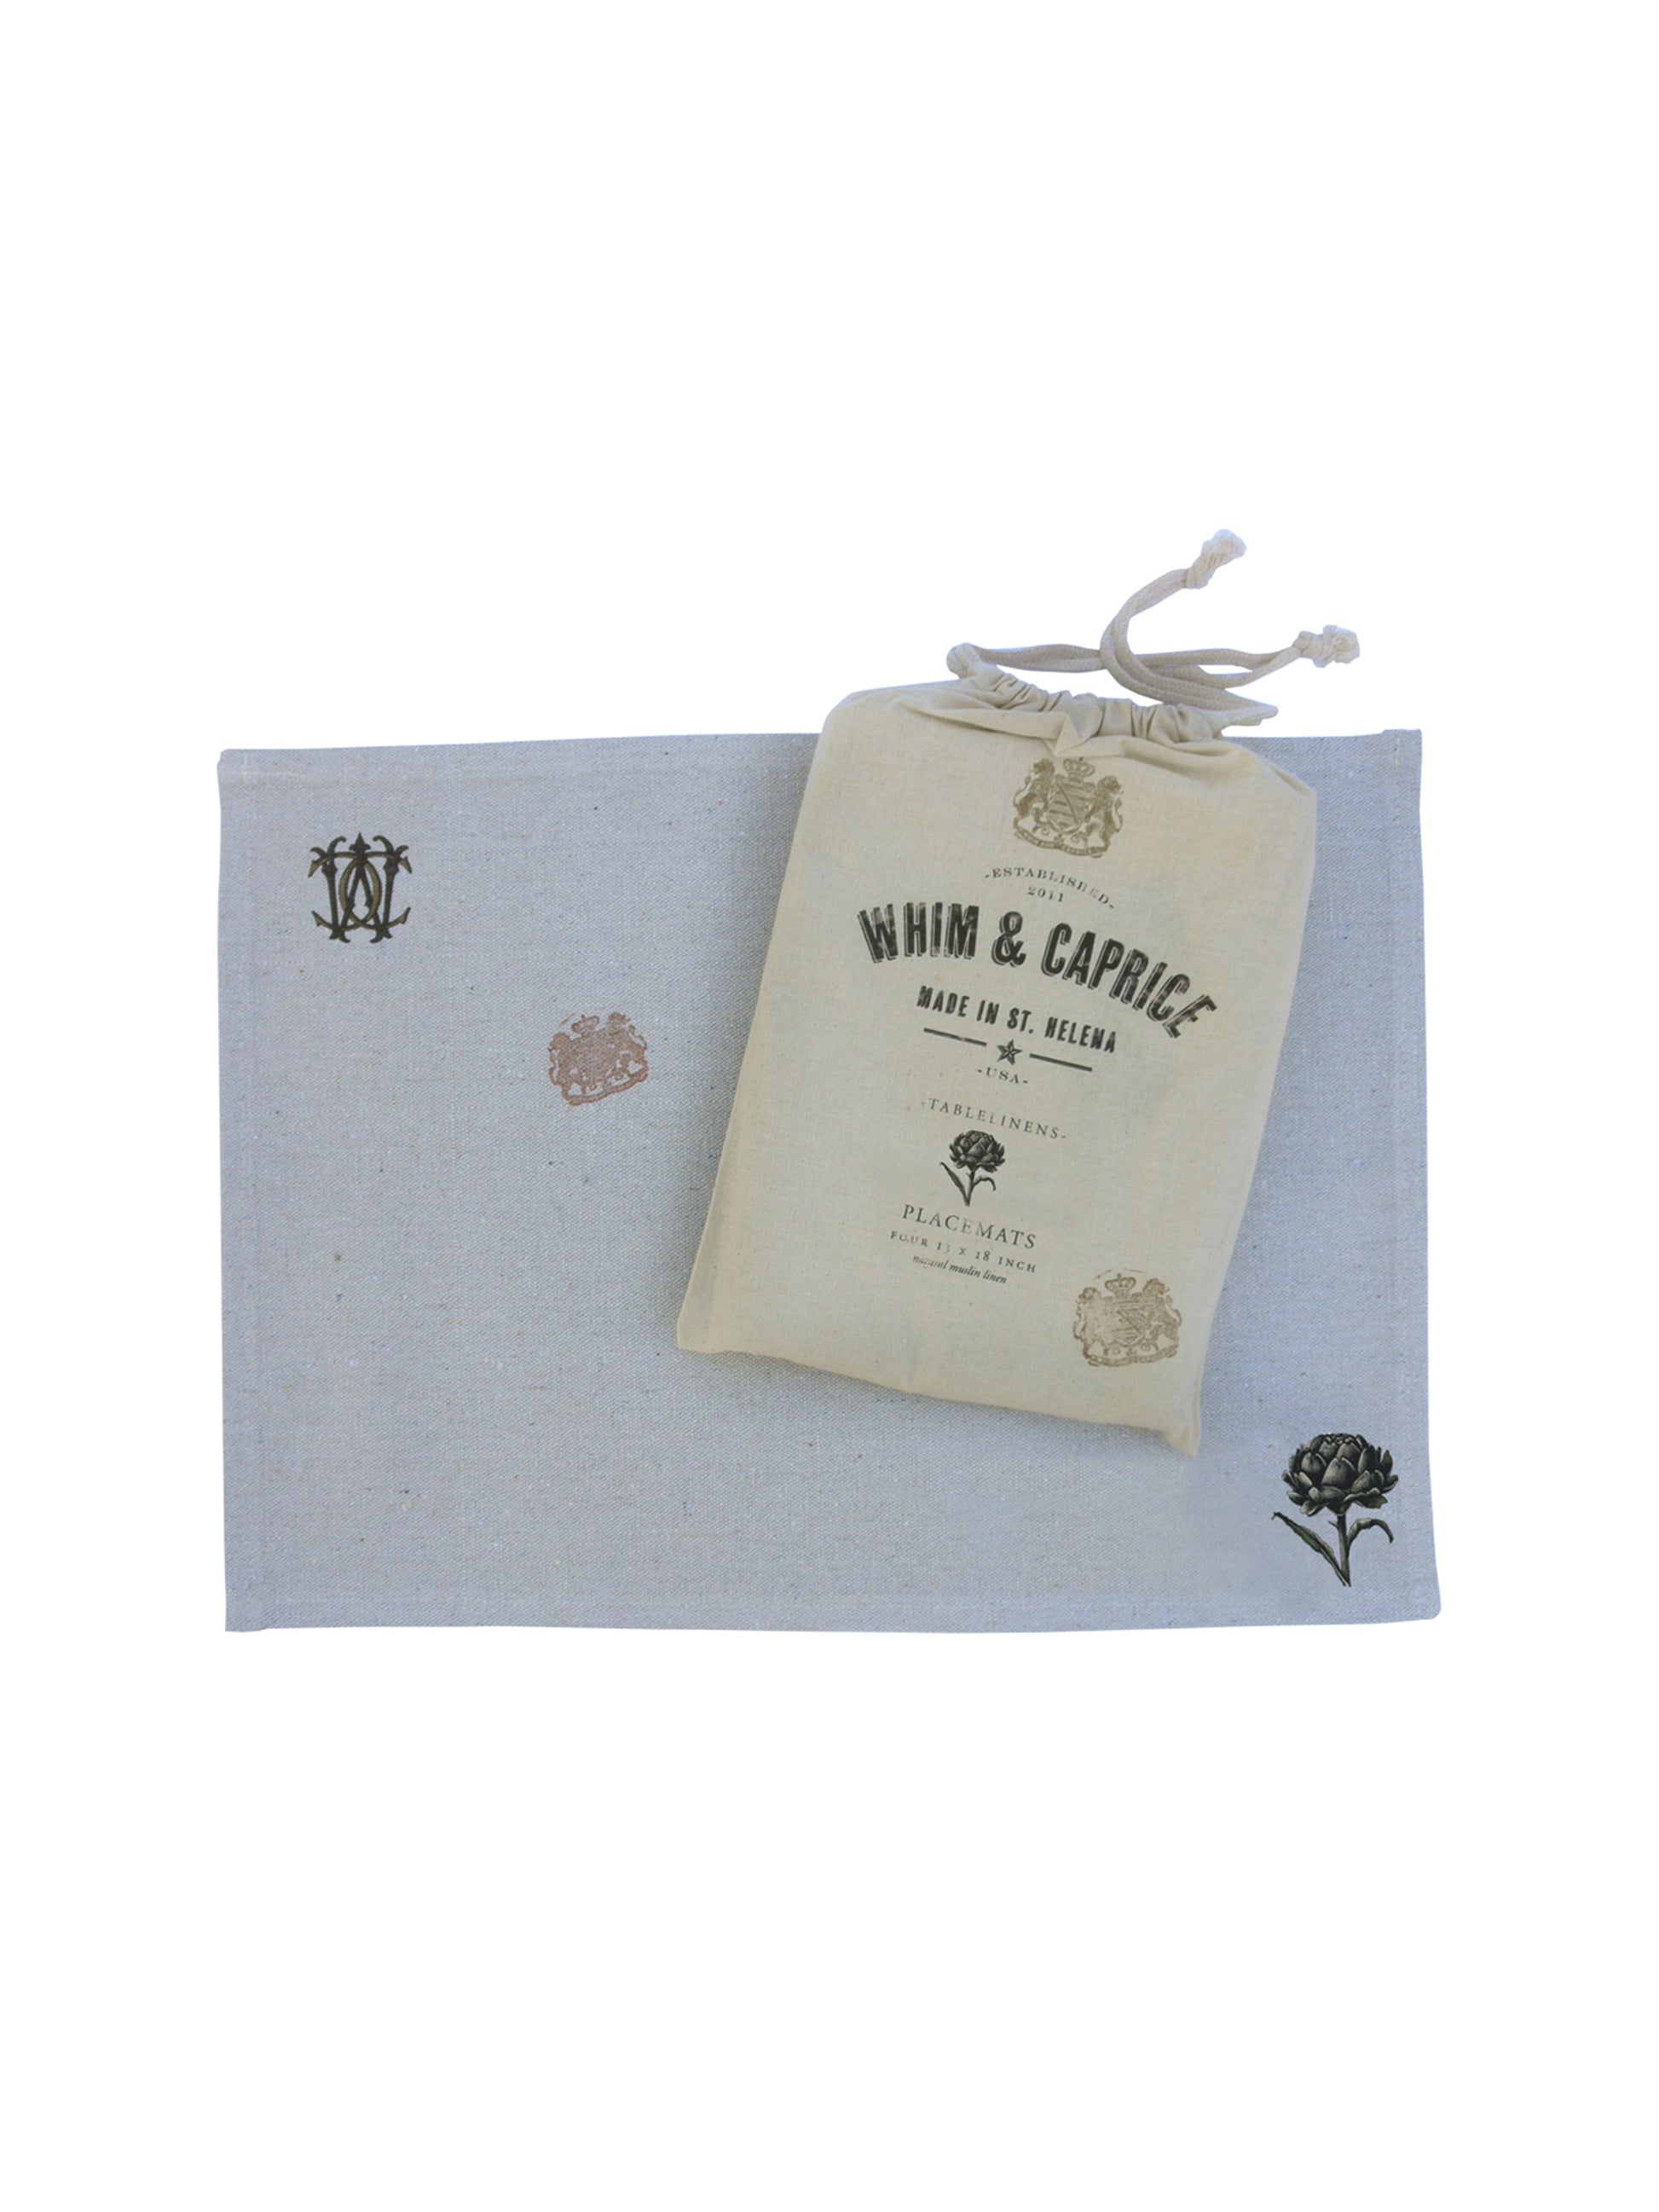 Whim and Caprice Artichoke Placemats Weston Table